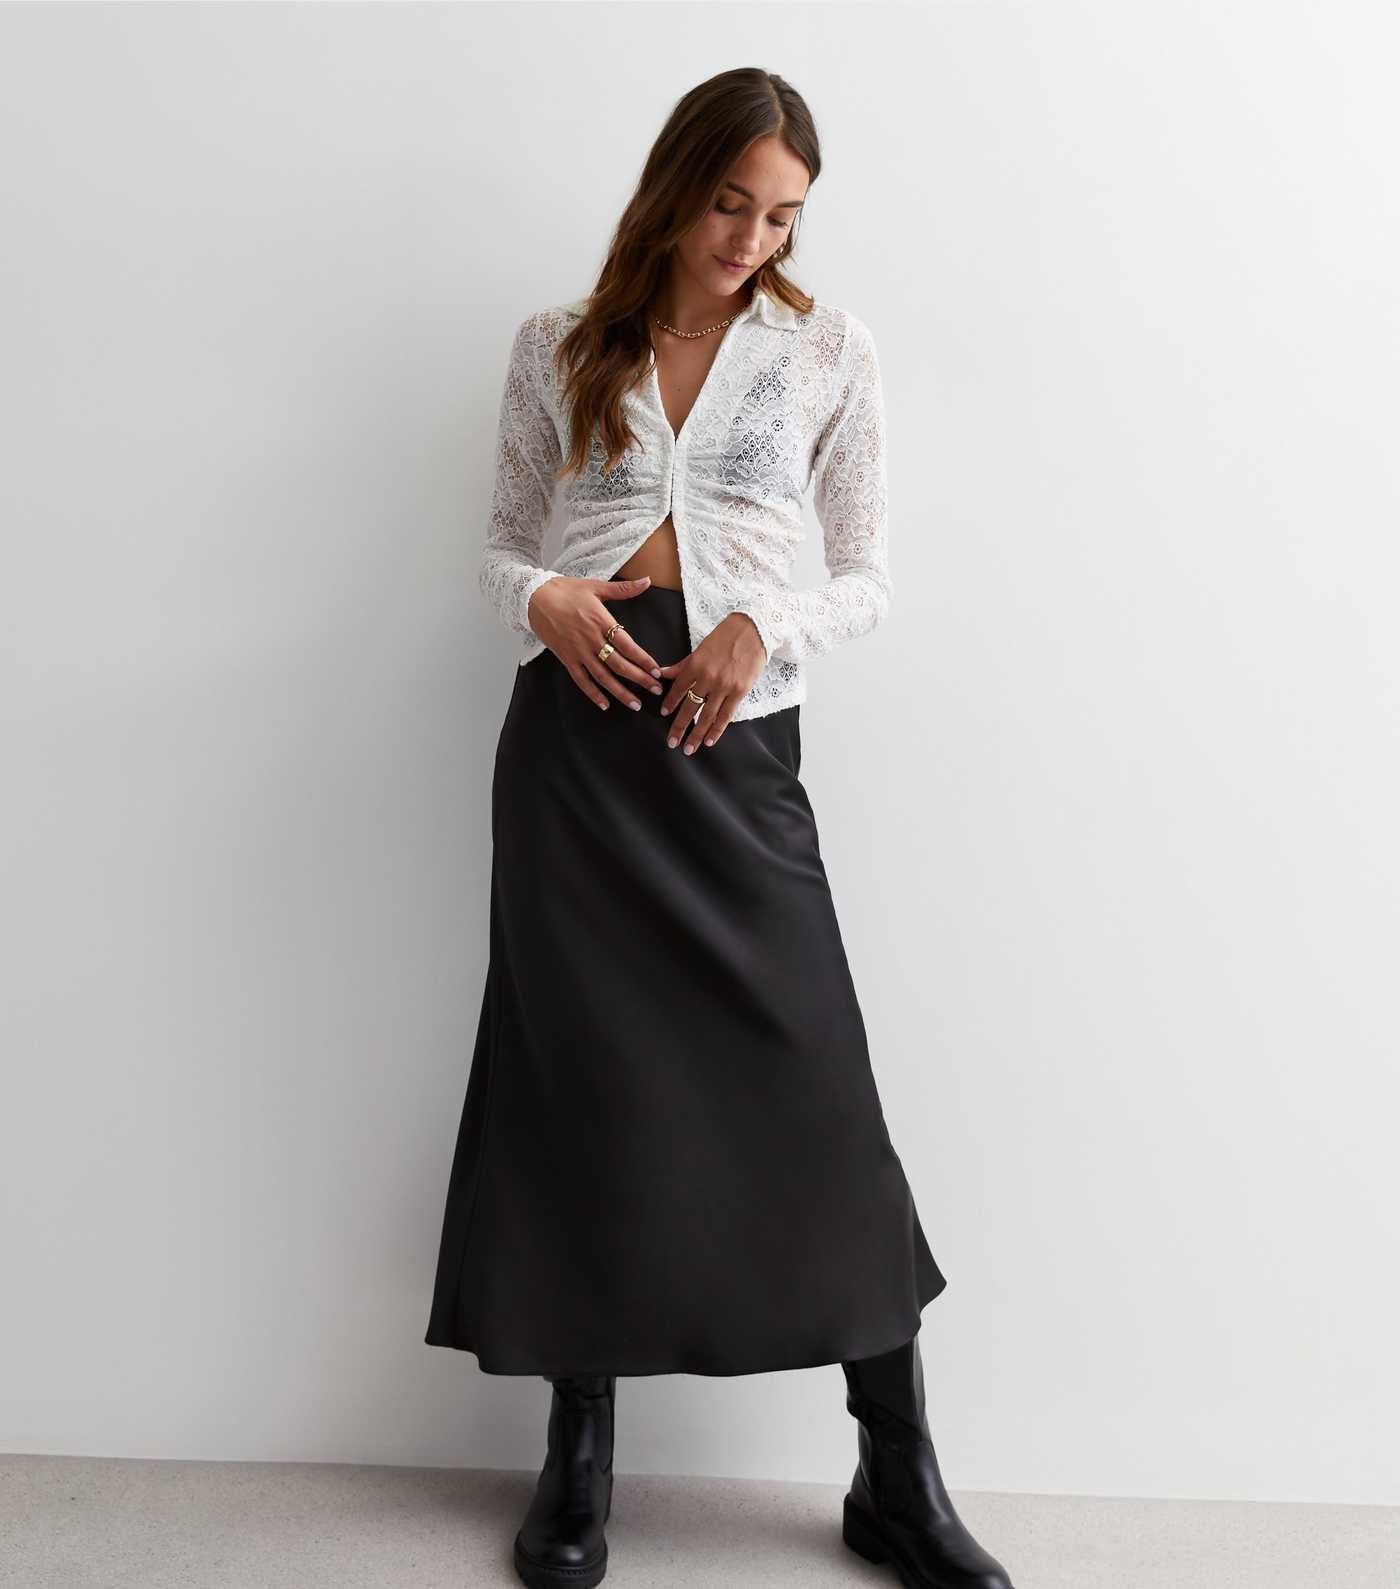 Black Satin Bias Cut Midaxi Skirt
						
						Add to Saved Items
						Remove from Saved Items | New Look (UK)